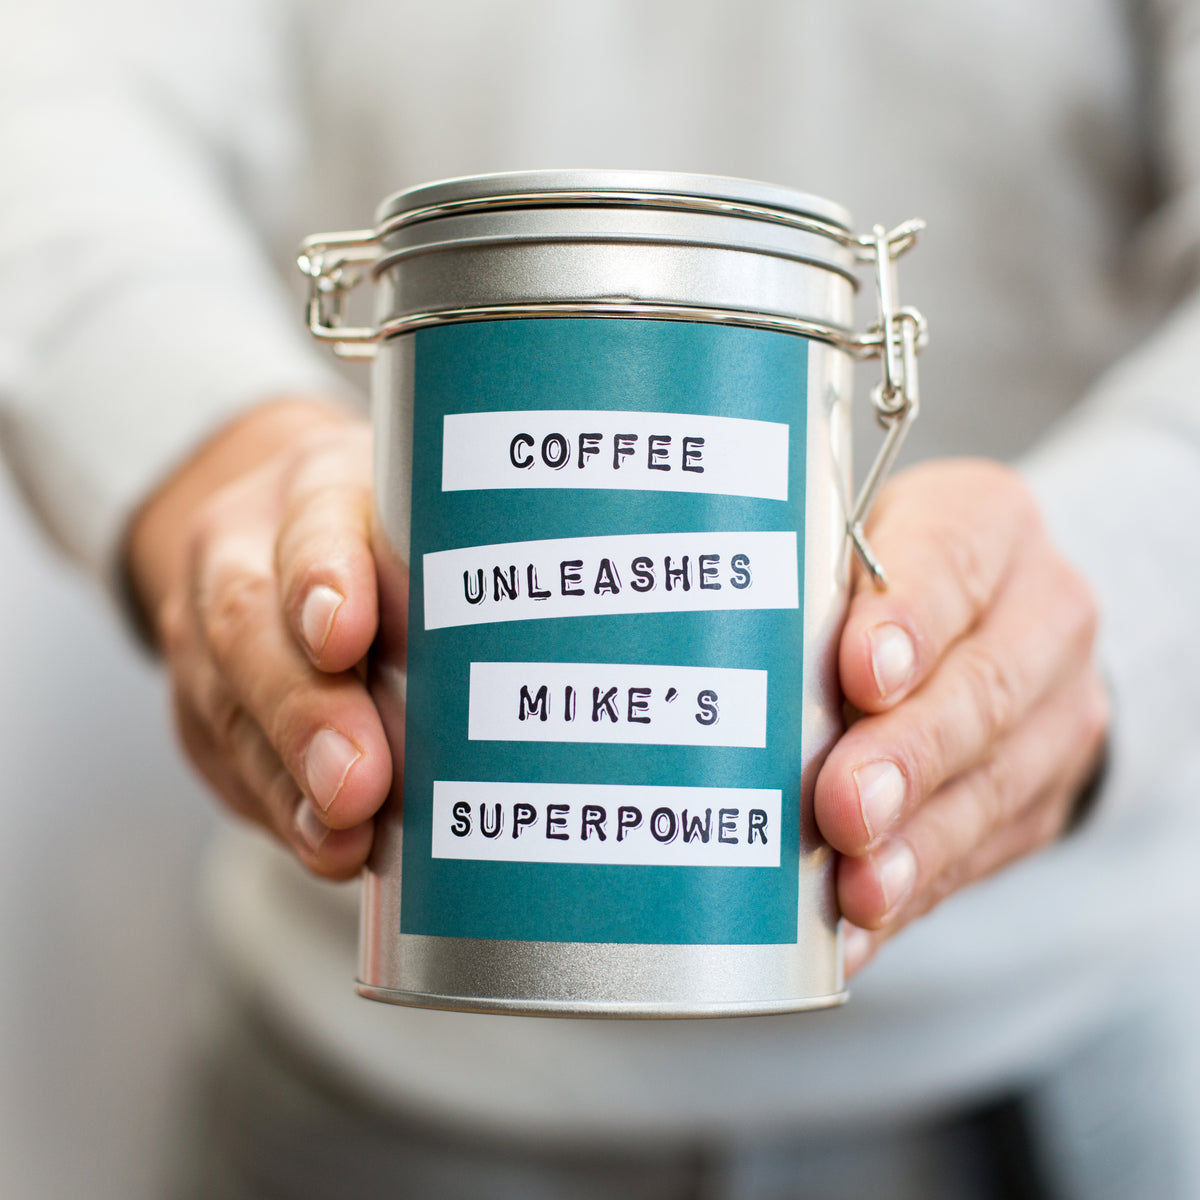 Superpower Personalised Coffee Gift In Tin